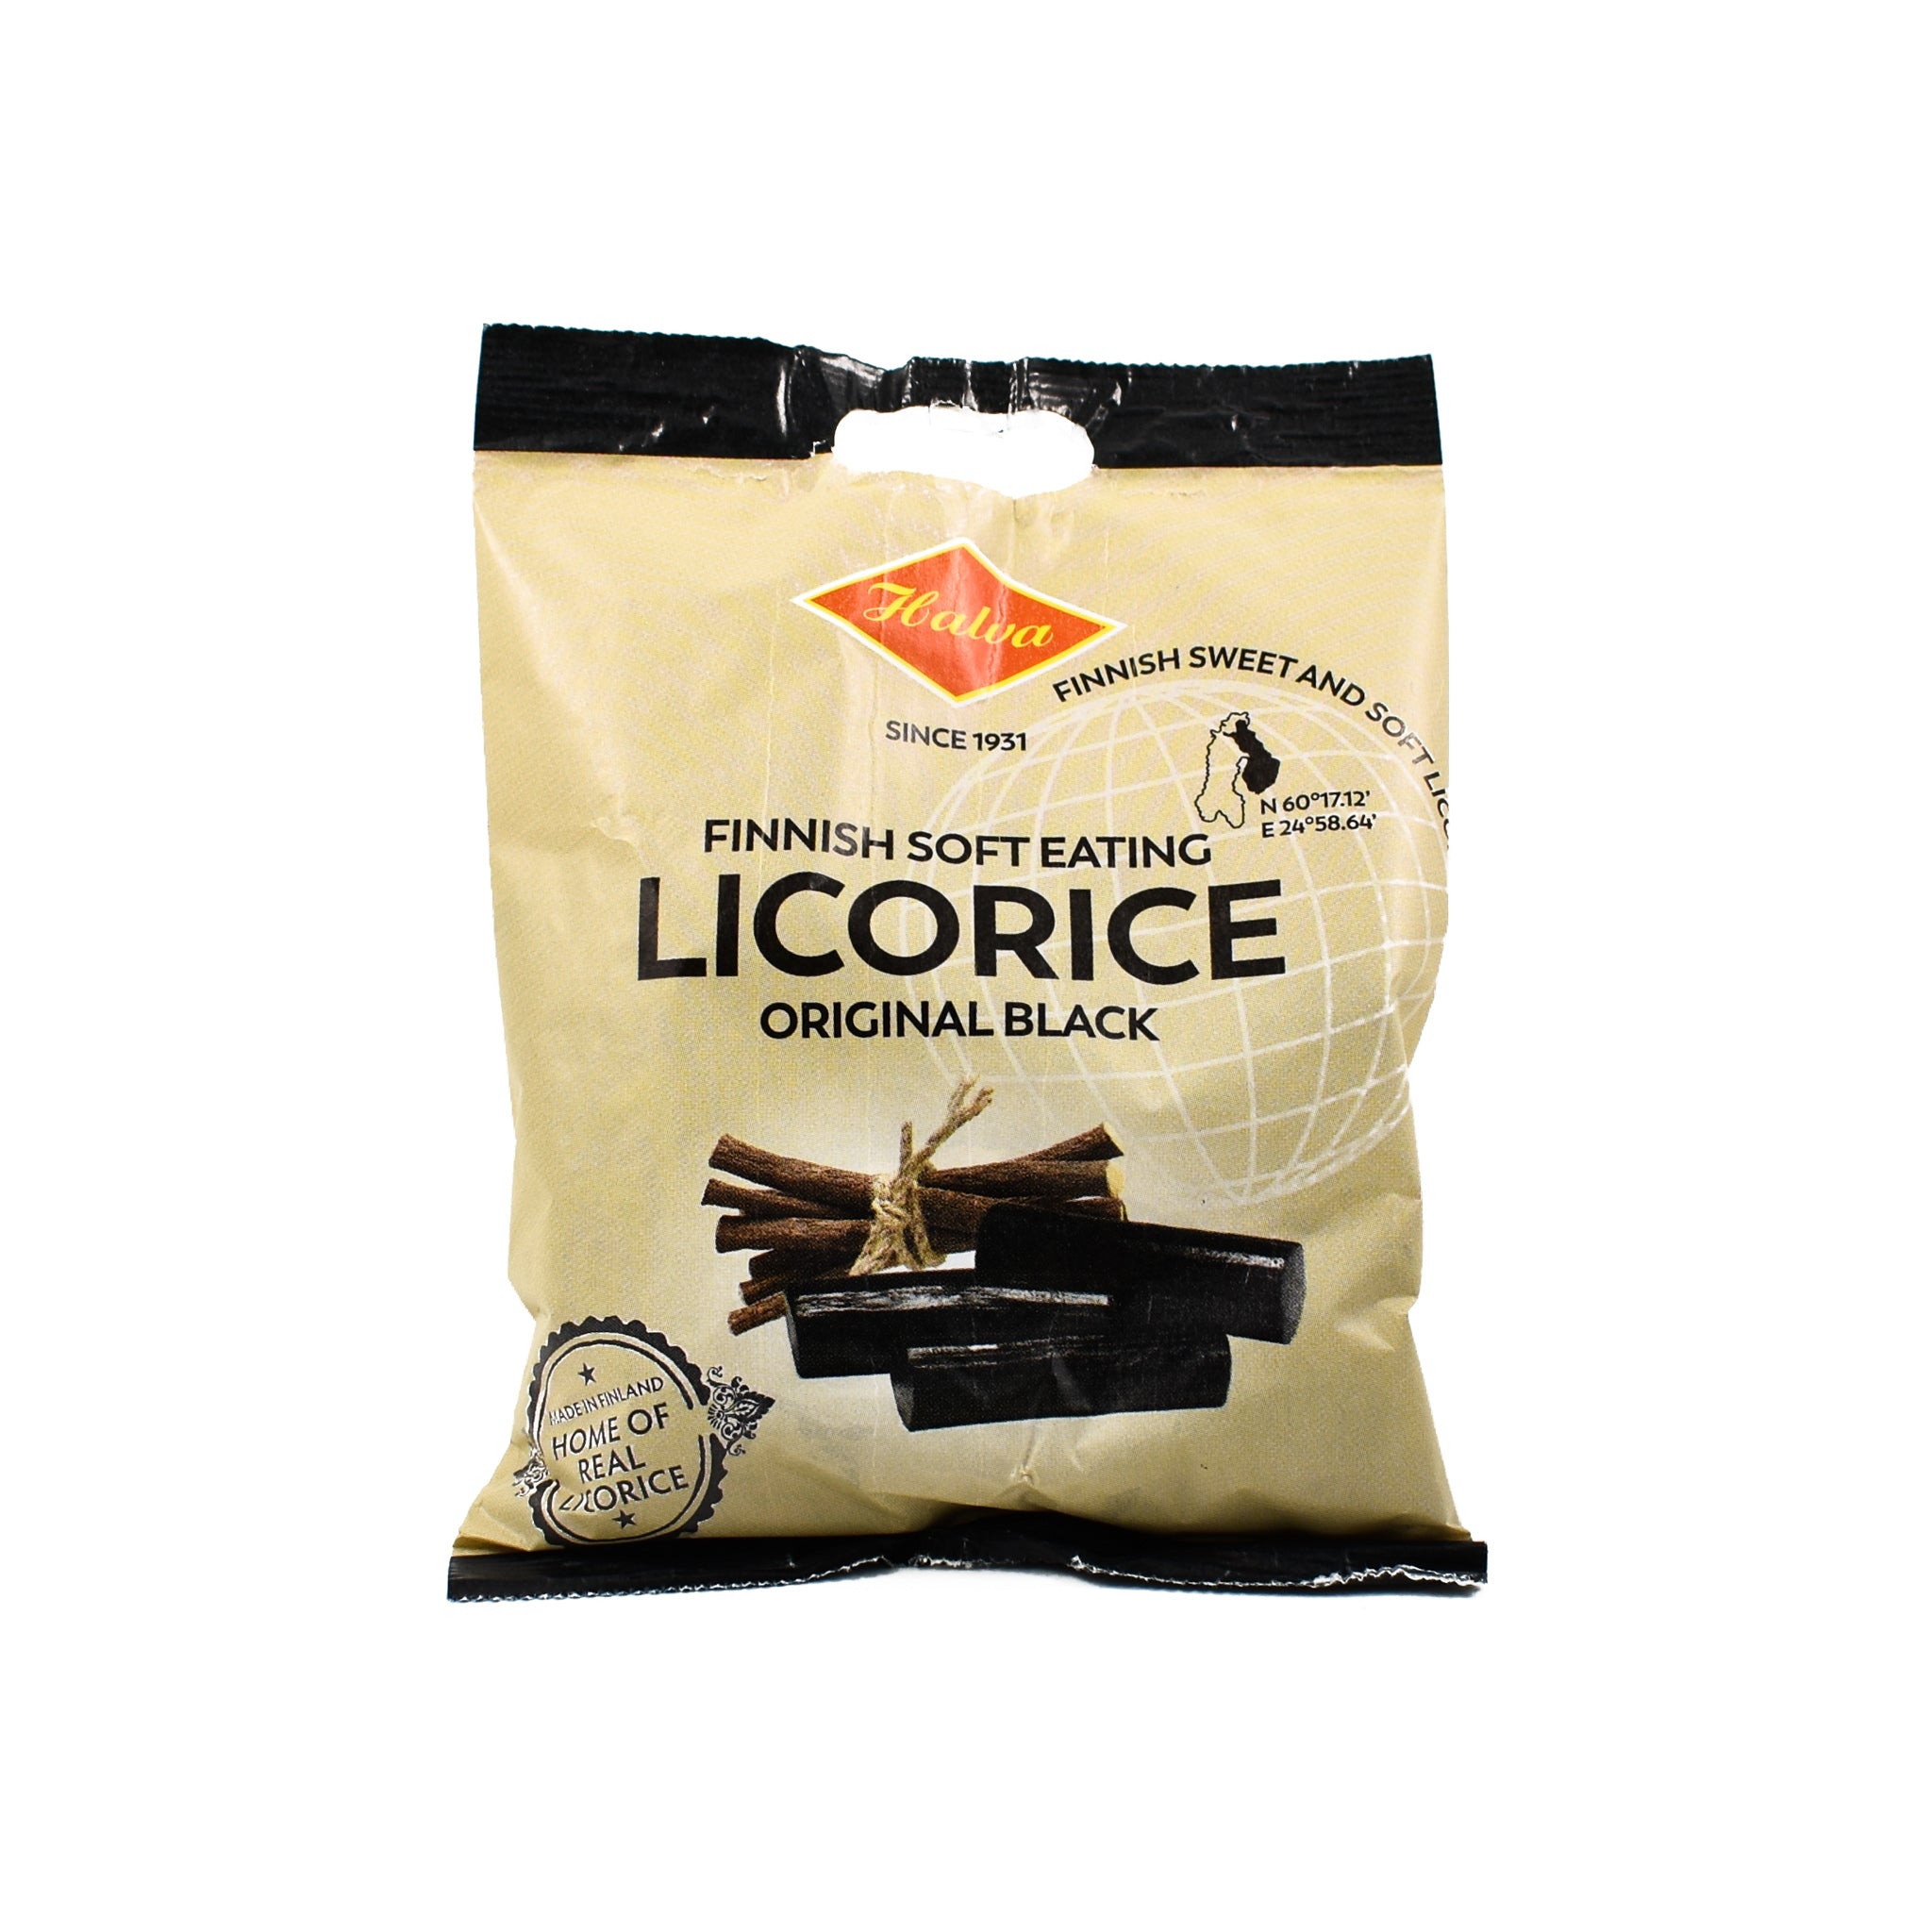 Halva Finnish Soft Eating Licorice Bag 200g Ingredients Chocolate Bars & Confectionery